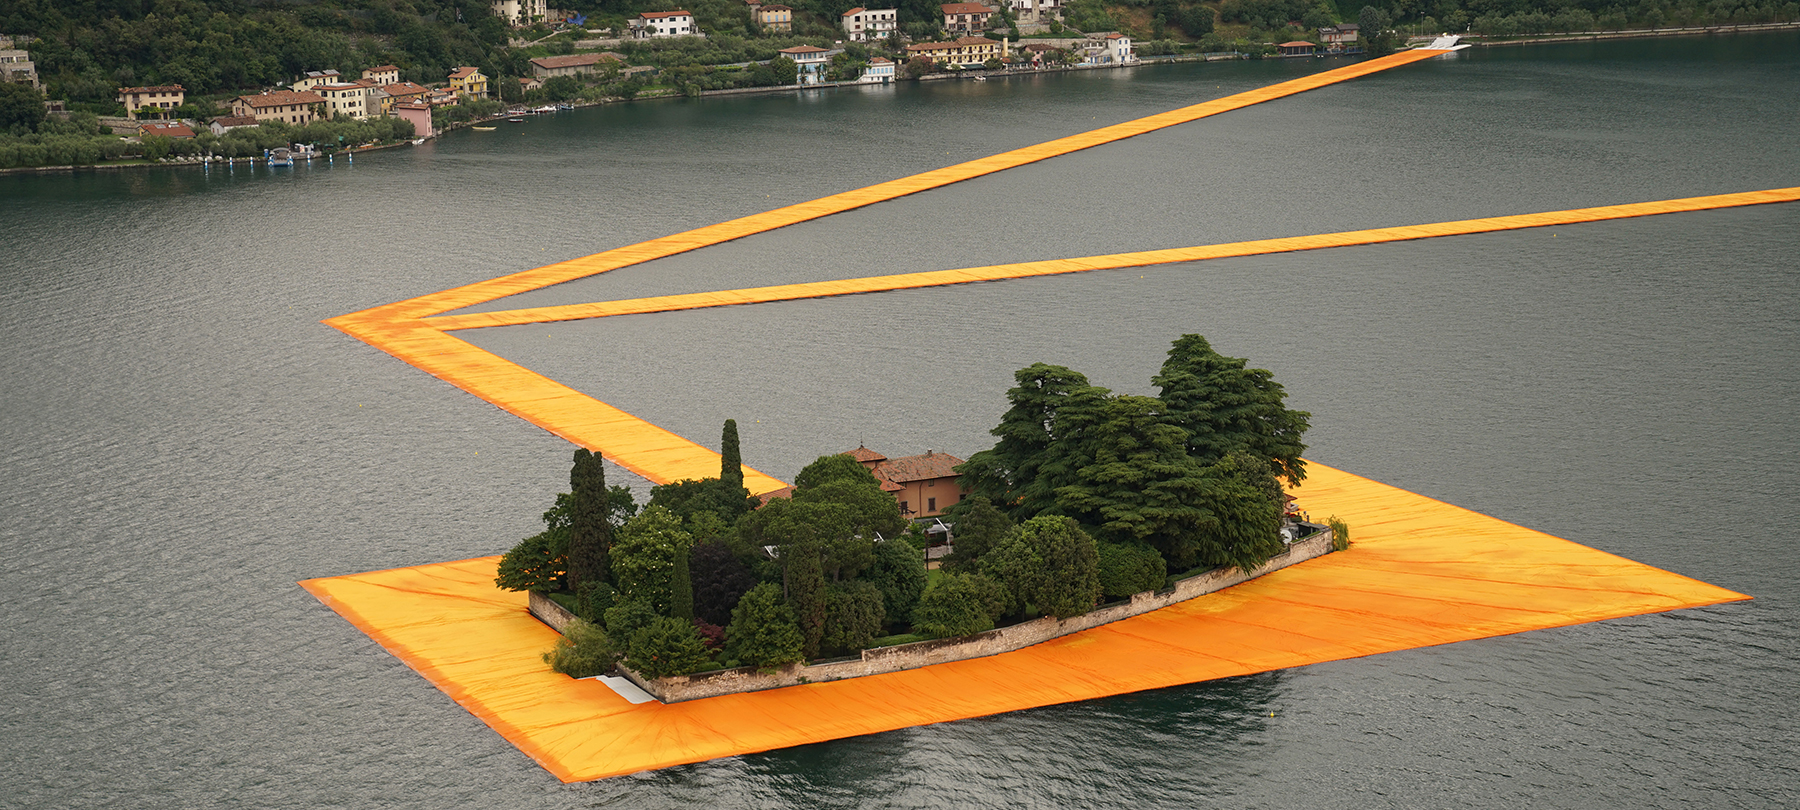 christo-and-jeanne-claude-floating-piers-lake-iseo-italy-designboom-1800